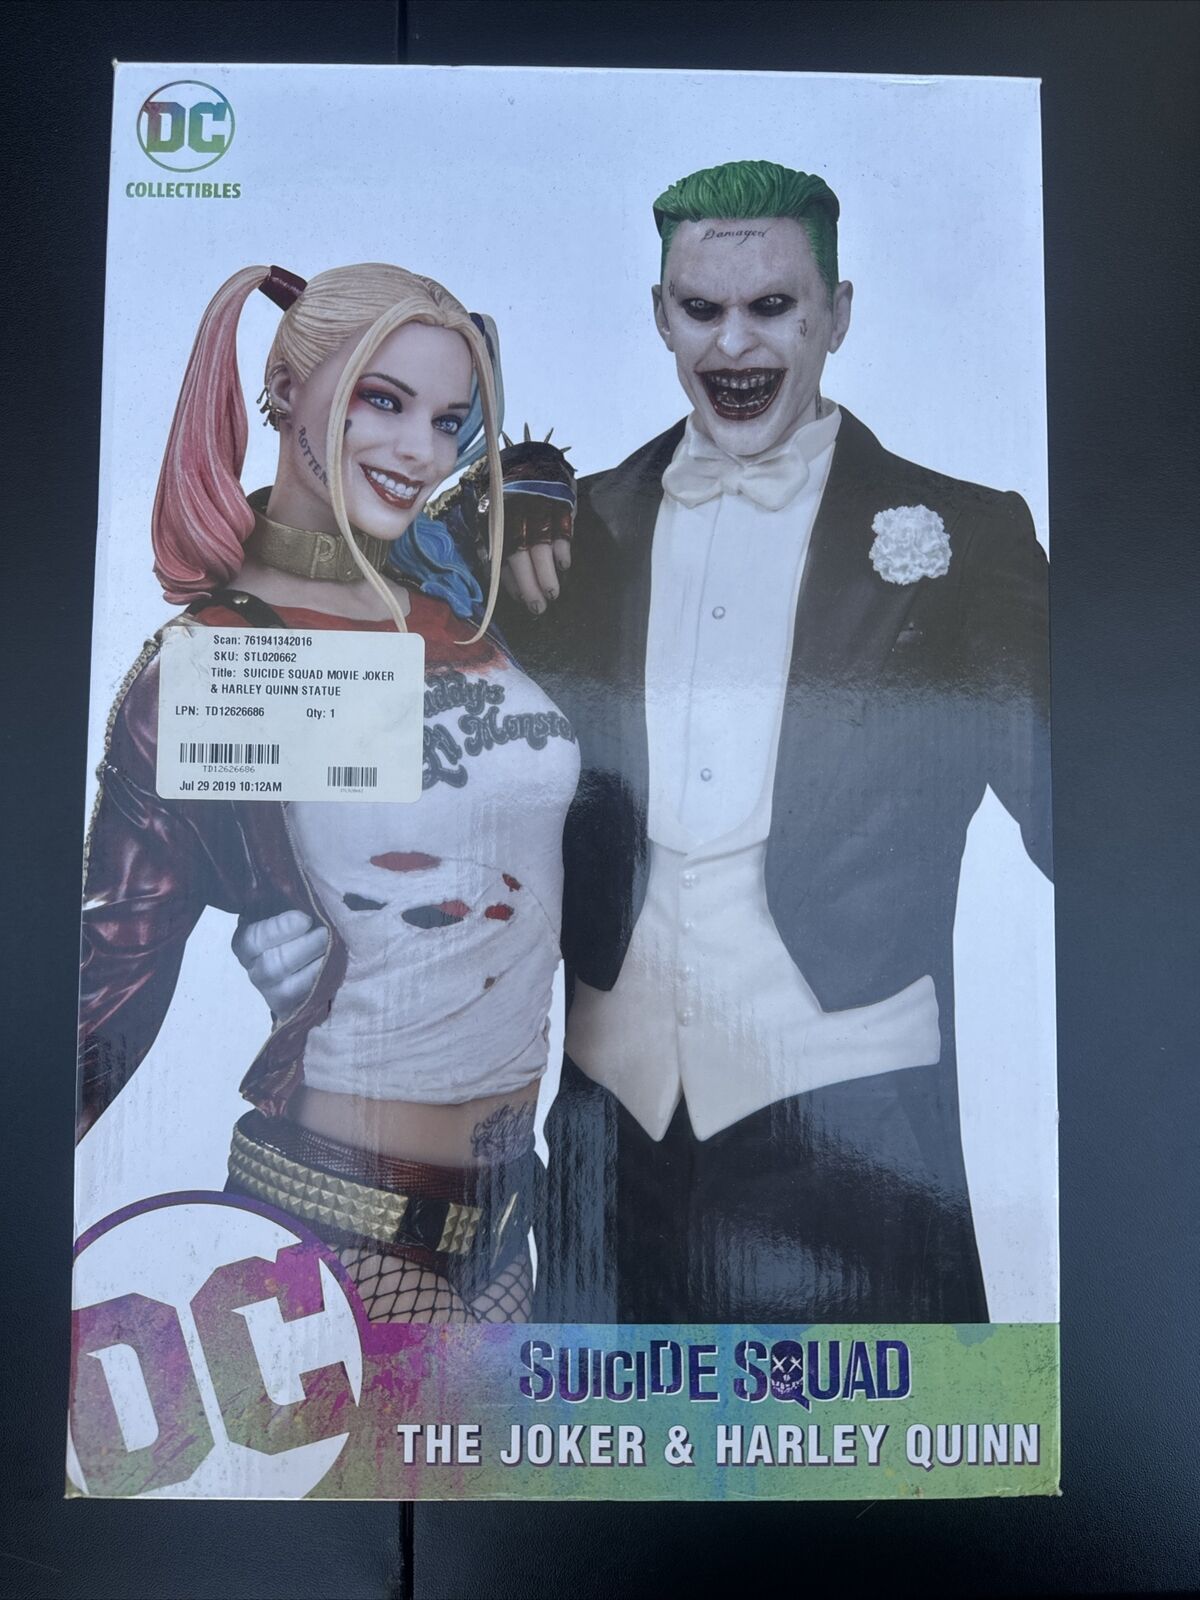 DC COLLECTIBLES SUICIDE SQUAD THE JOKER & HARLEY QUINN STATUE NEW U.S.